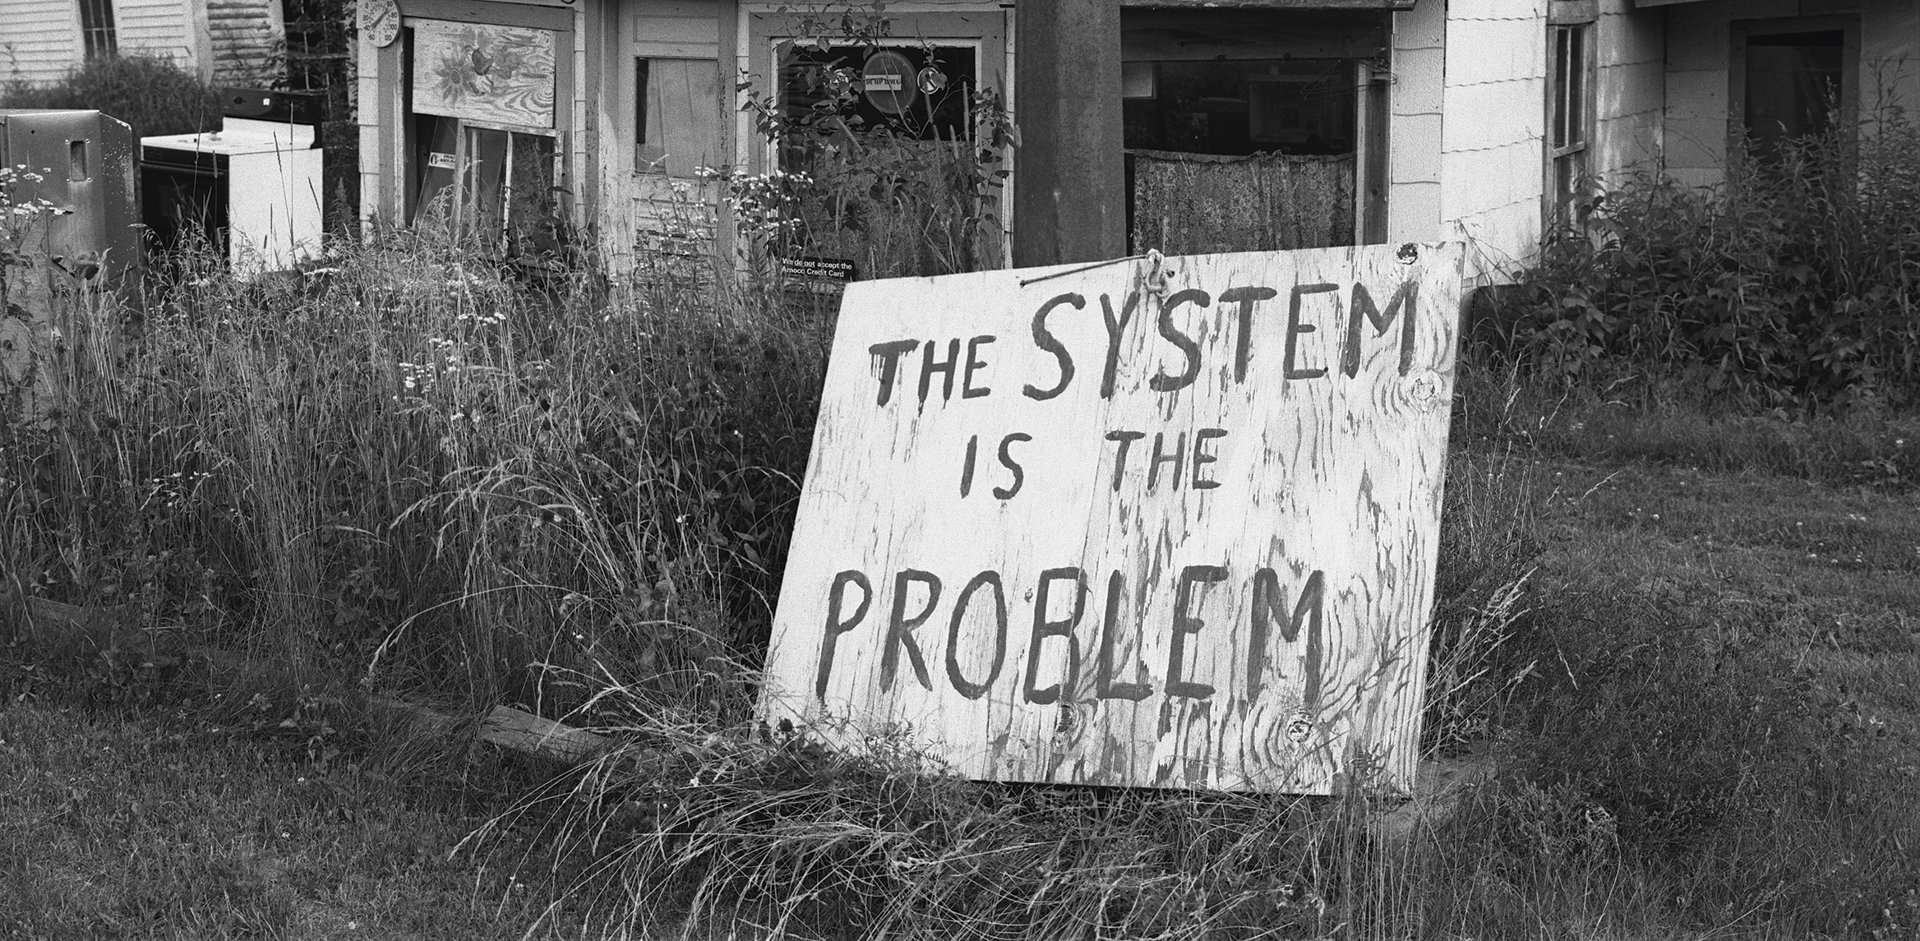 Black and white photo of ruined house with hand-painted sign "The System Is the Problem"